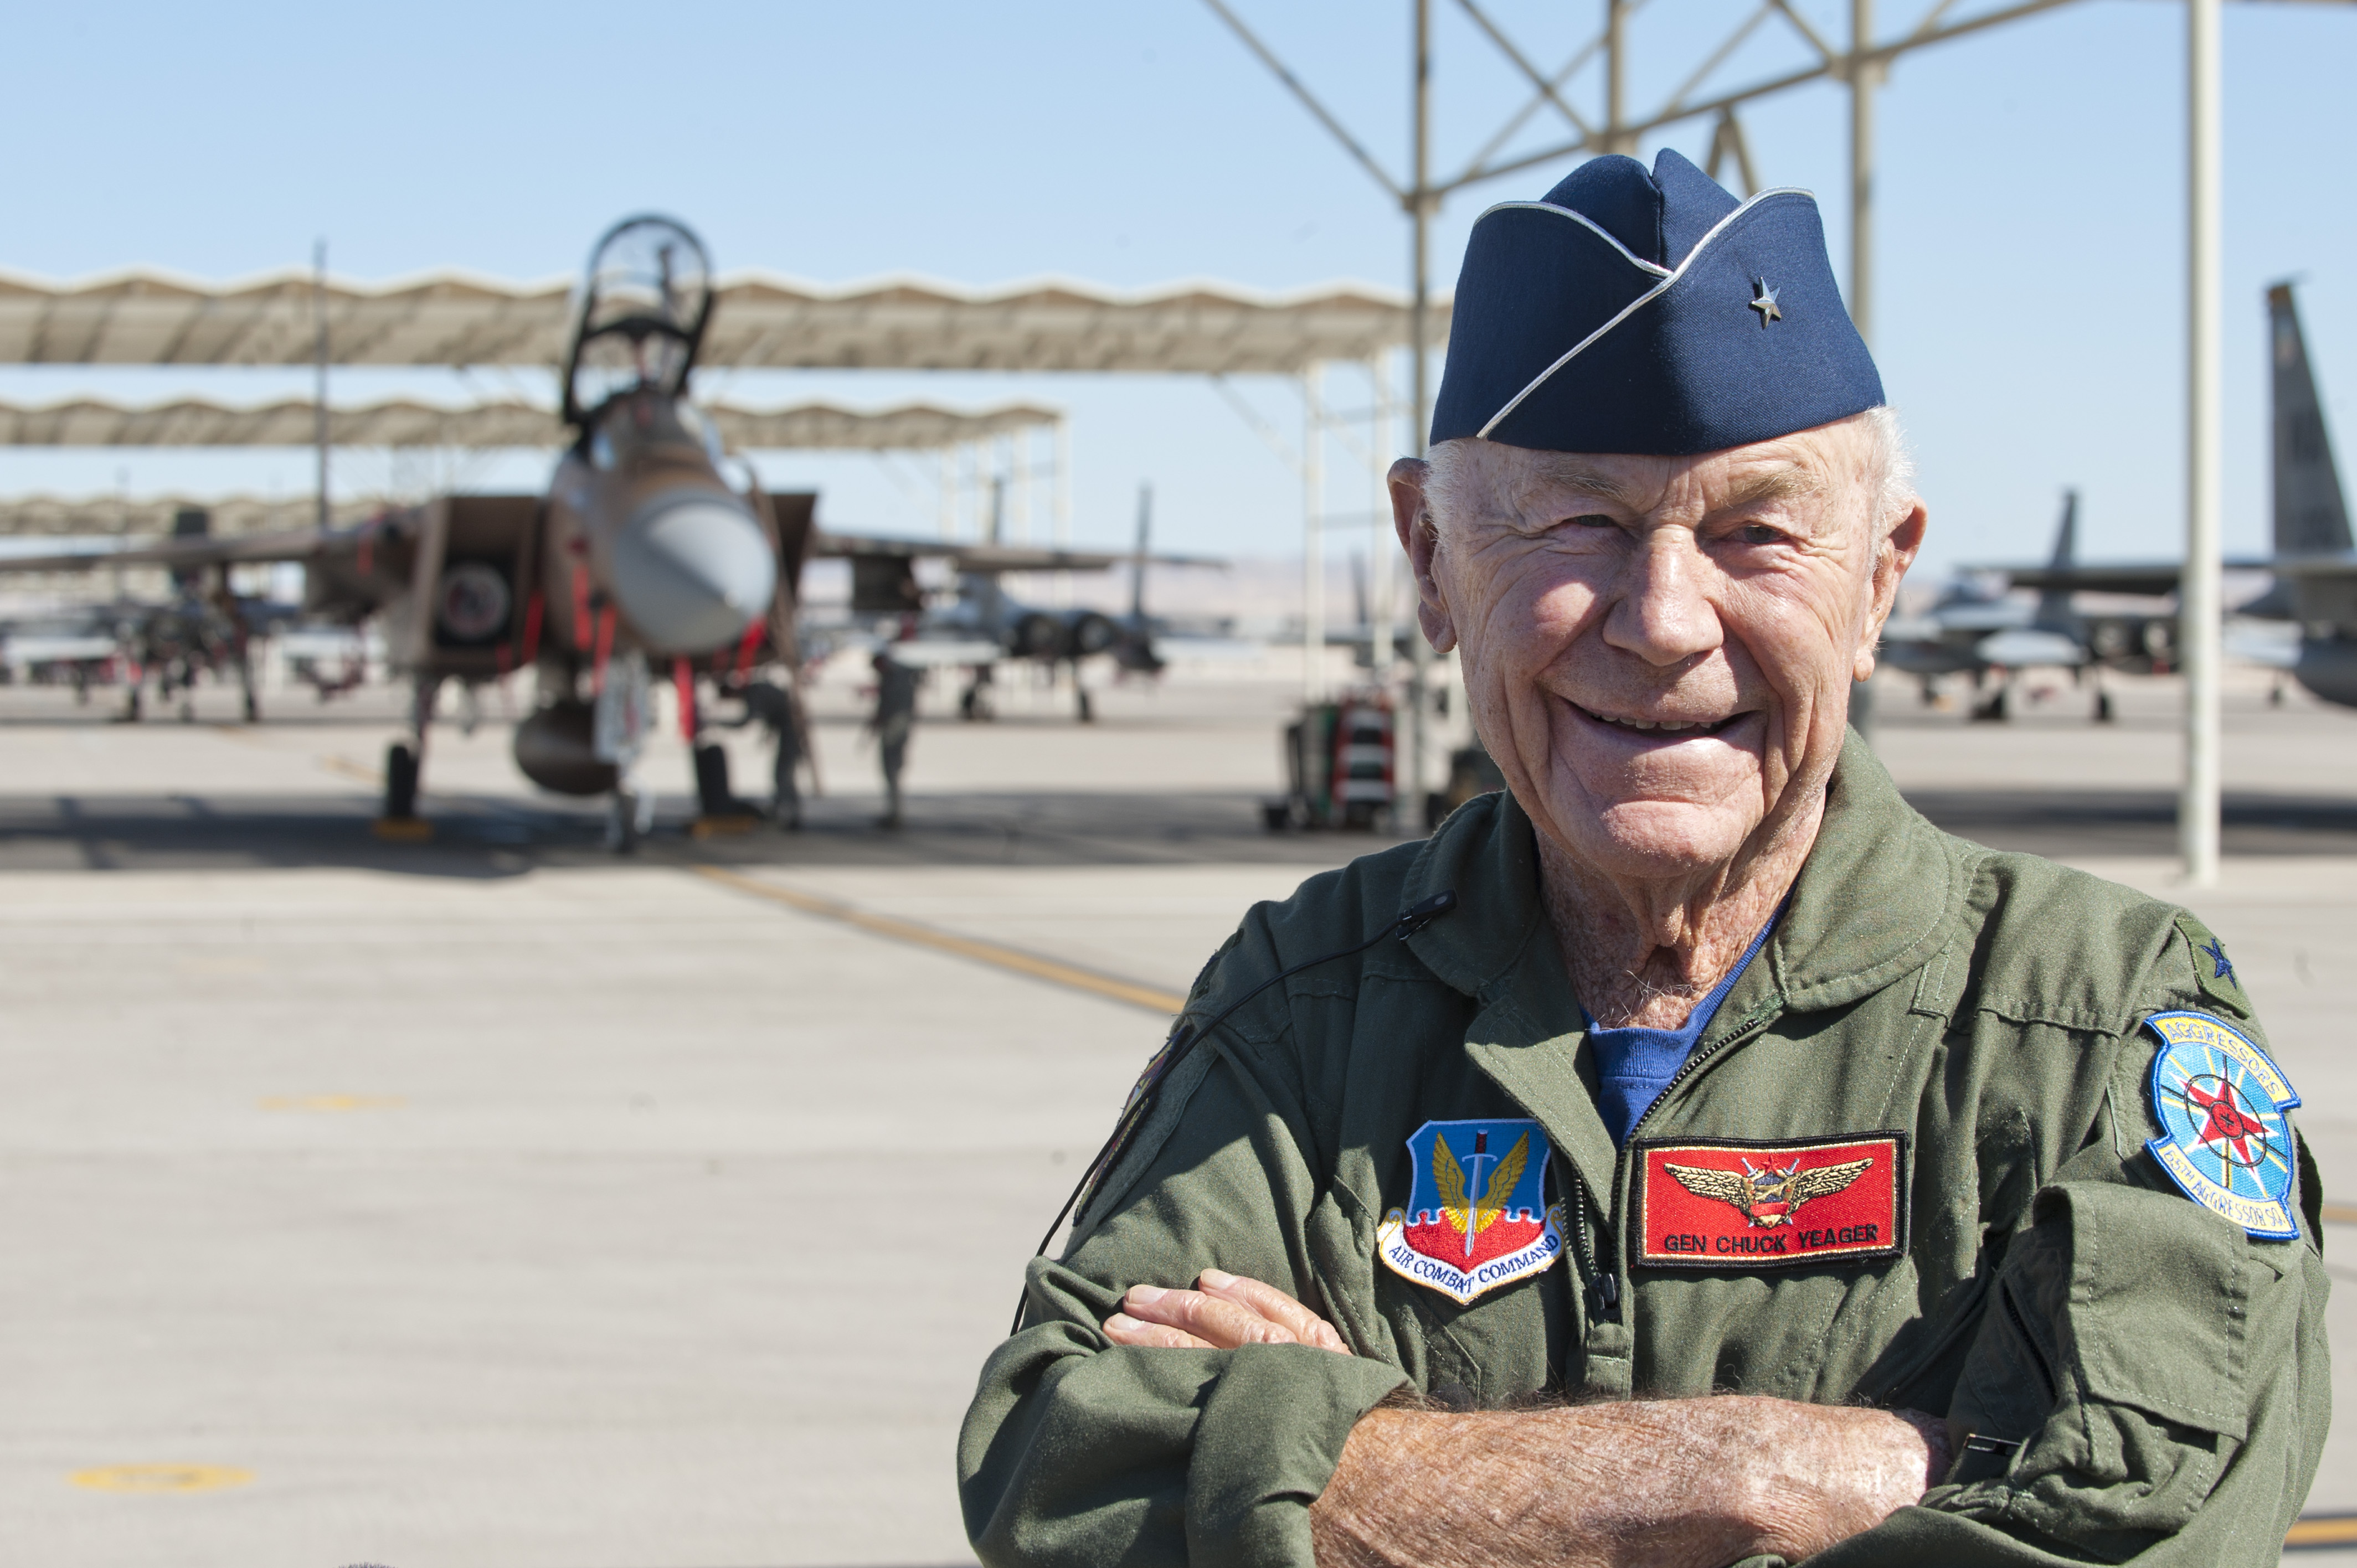 American hero & aviation legend Chuck Yeager passed away at 97